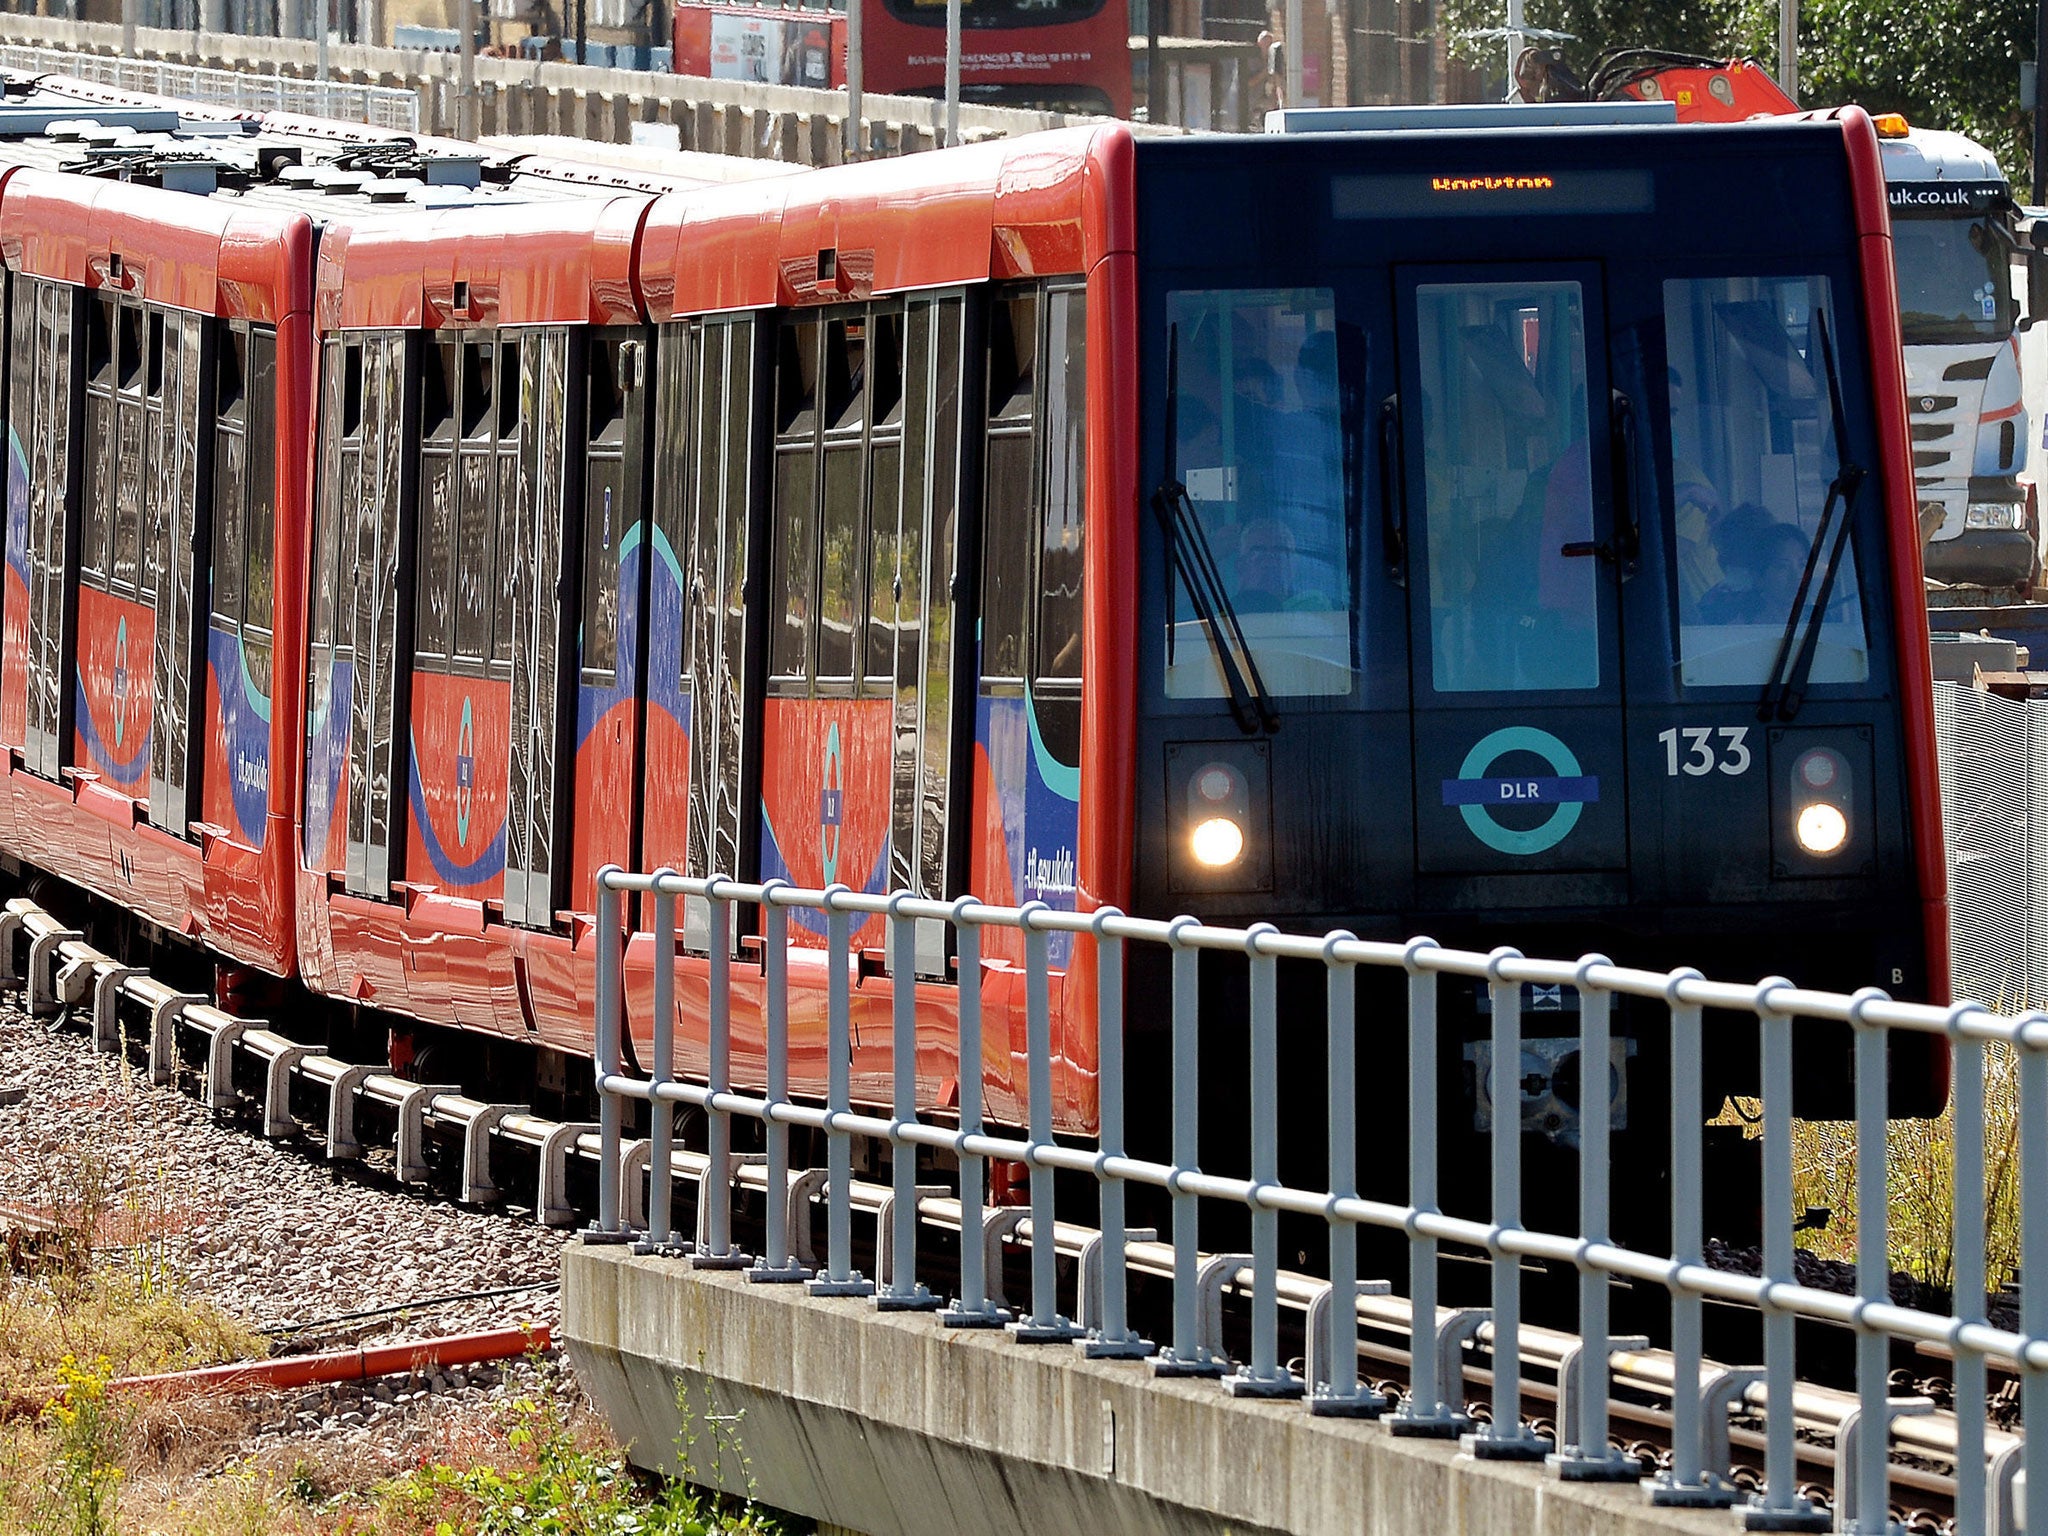 The Dockland Light Railway is currently down